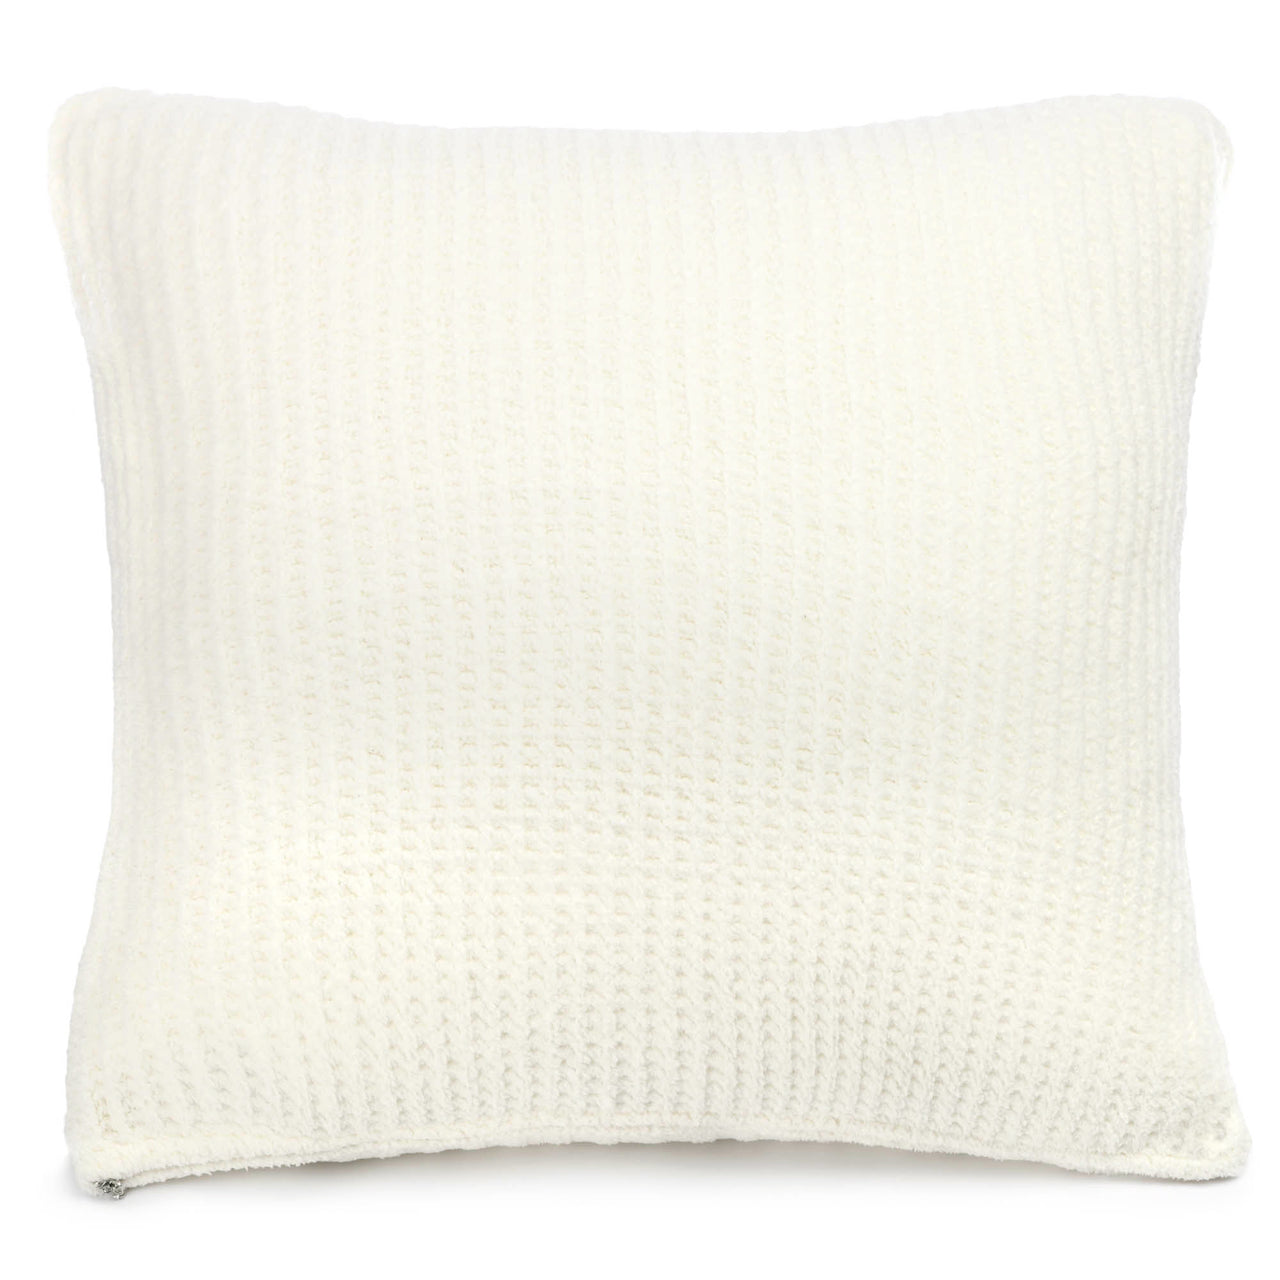 WAFFLE-KNIT CUSHION COVER - Light red